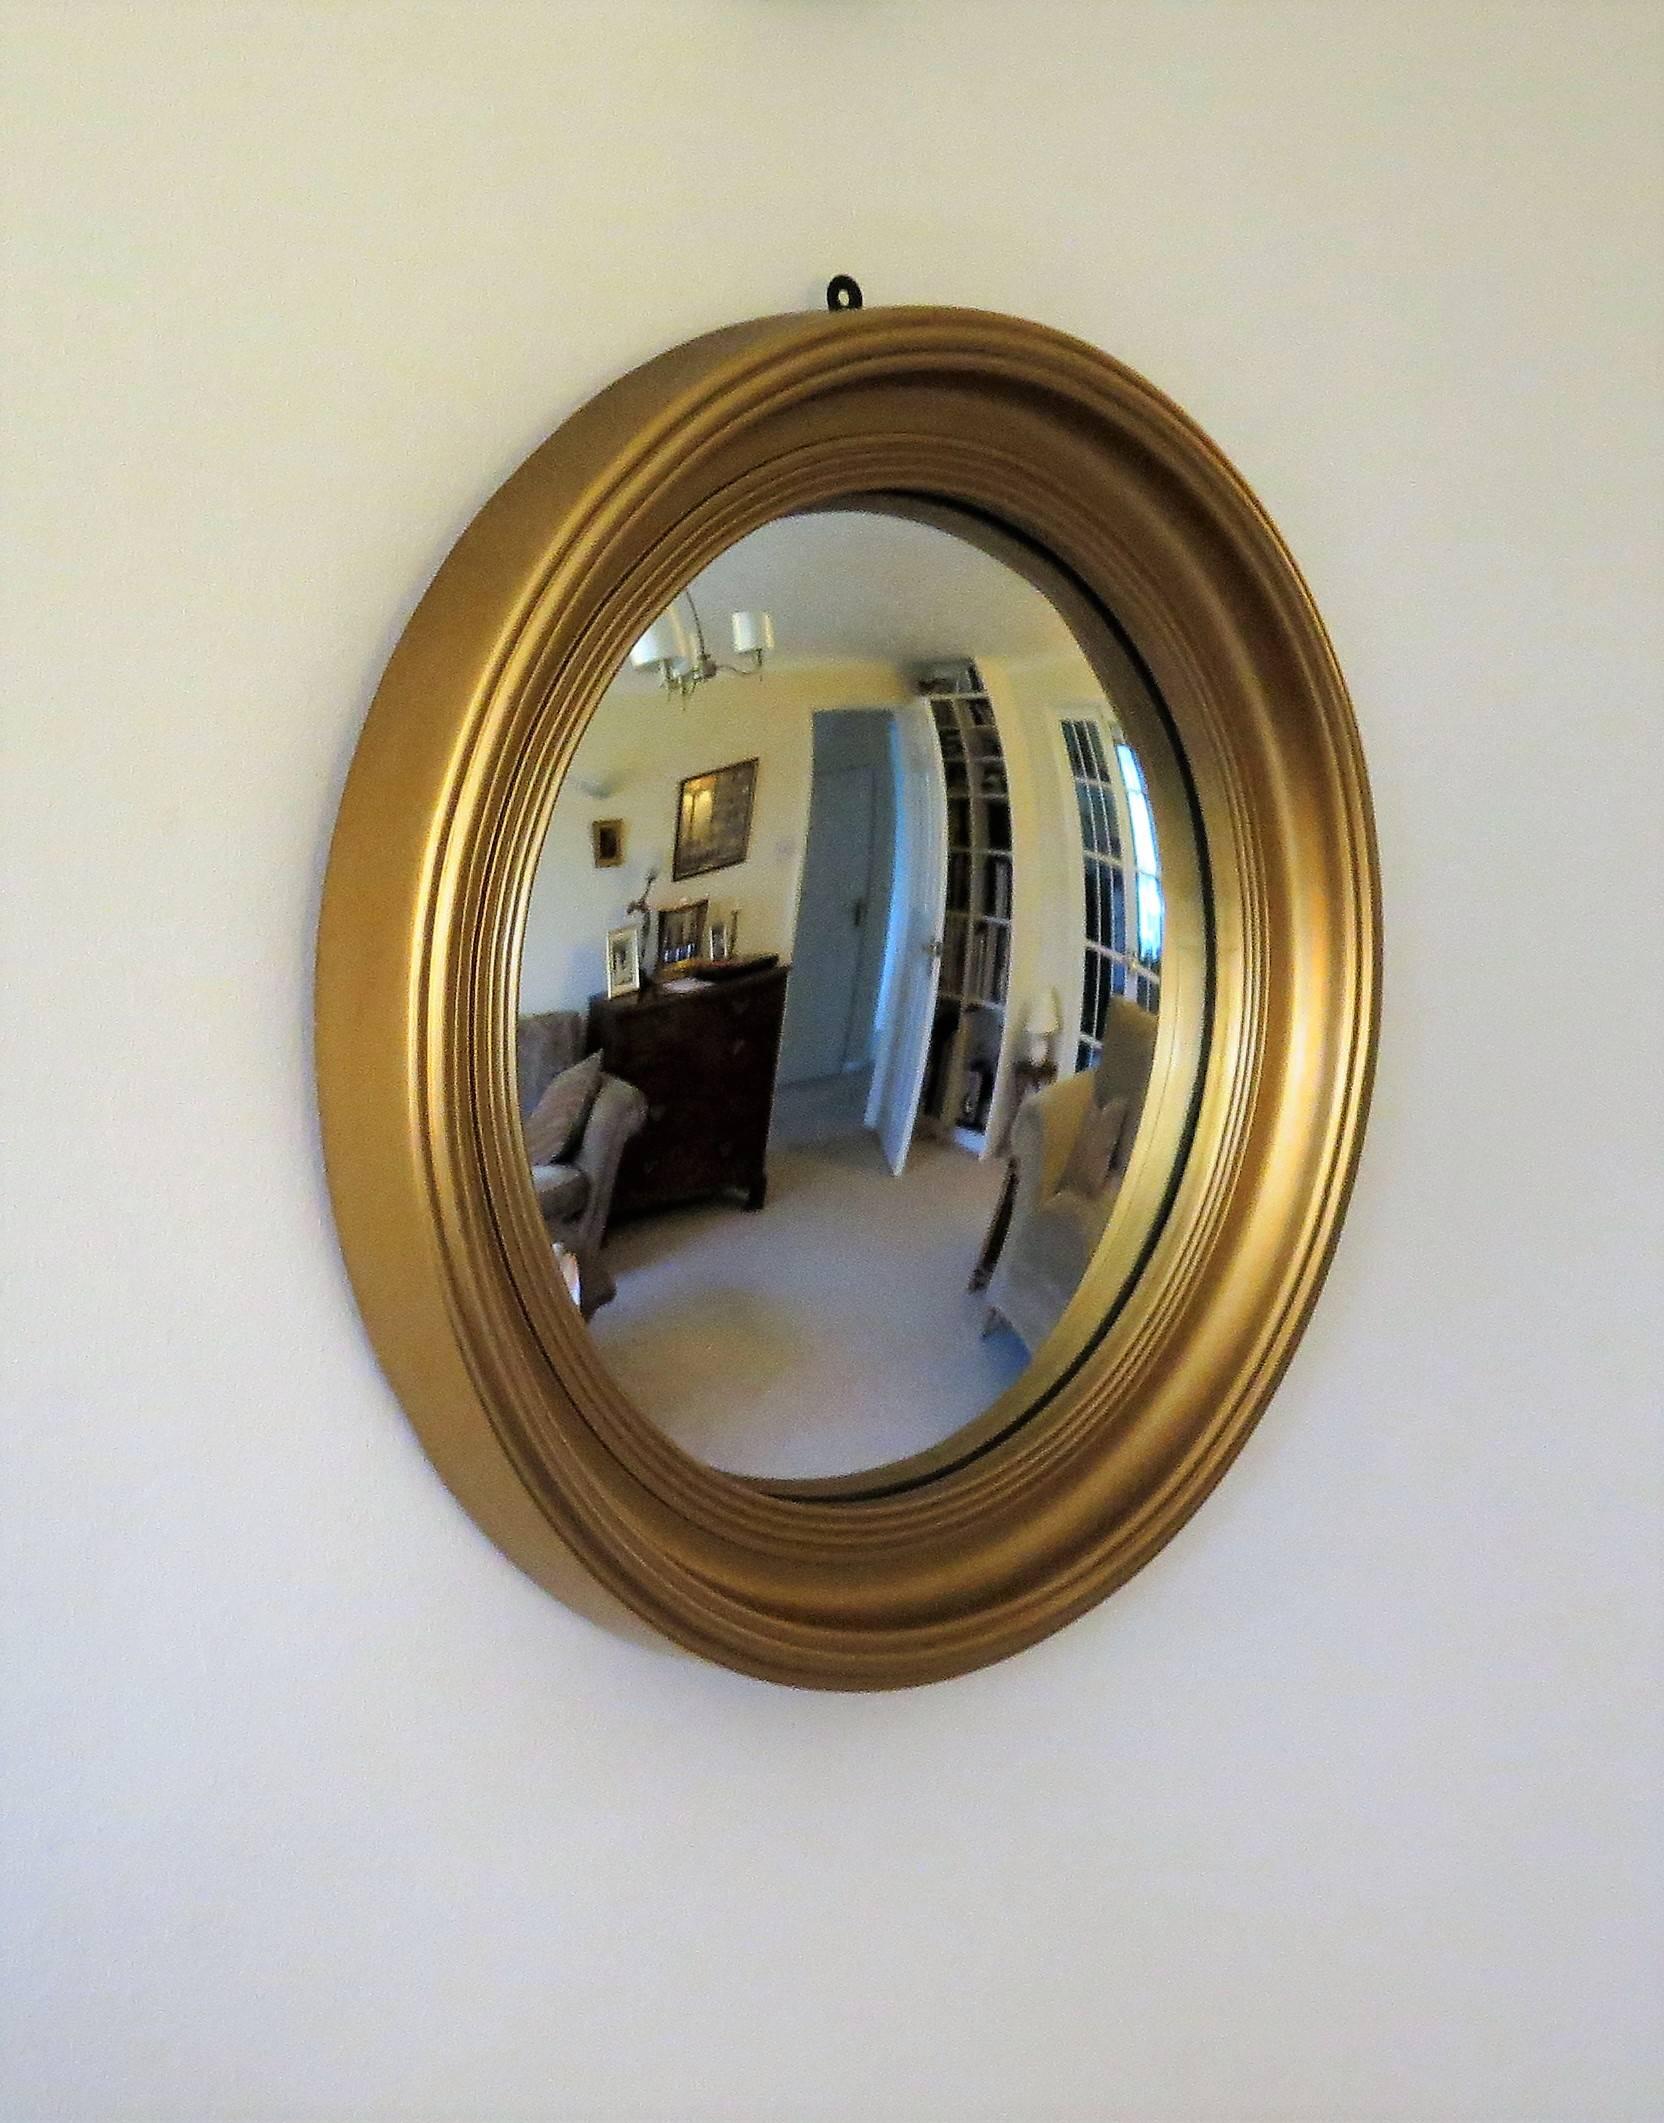 English Round Convex Mirror Giltwood in Regency Style with reeded detail, circa 1920